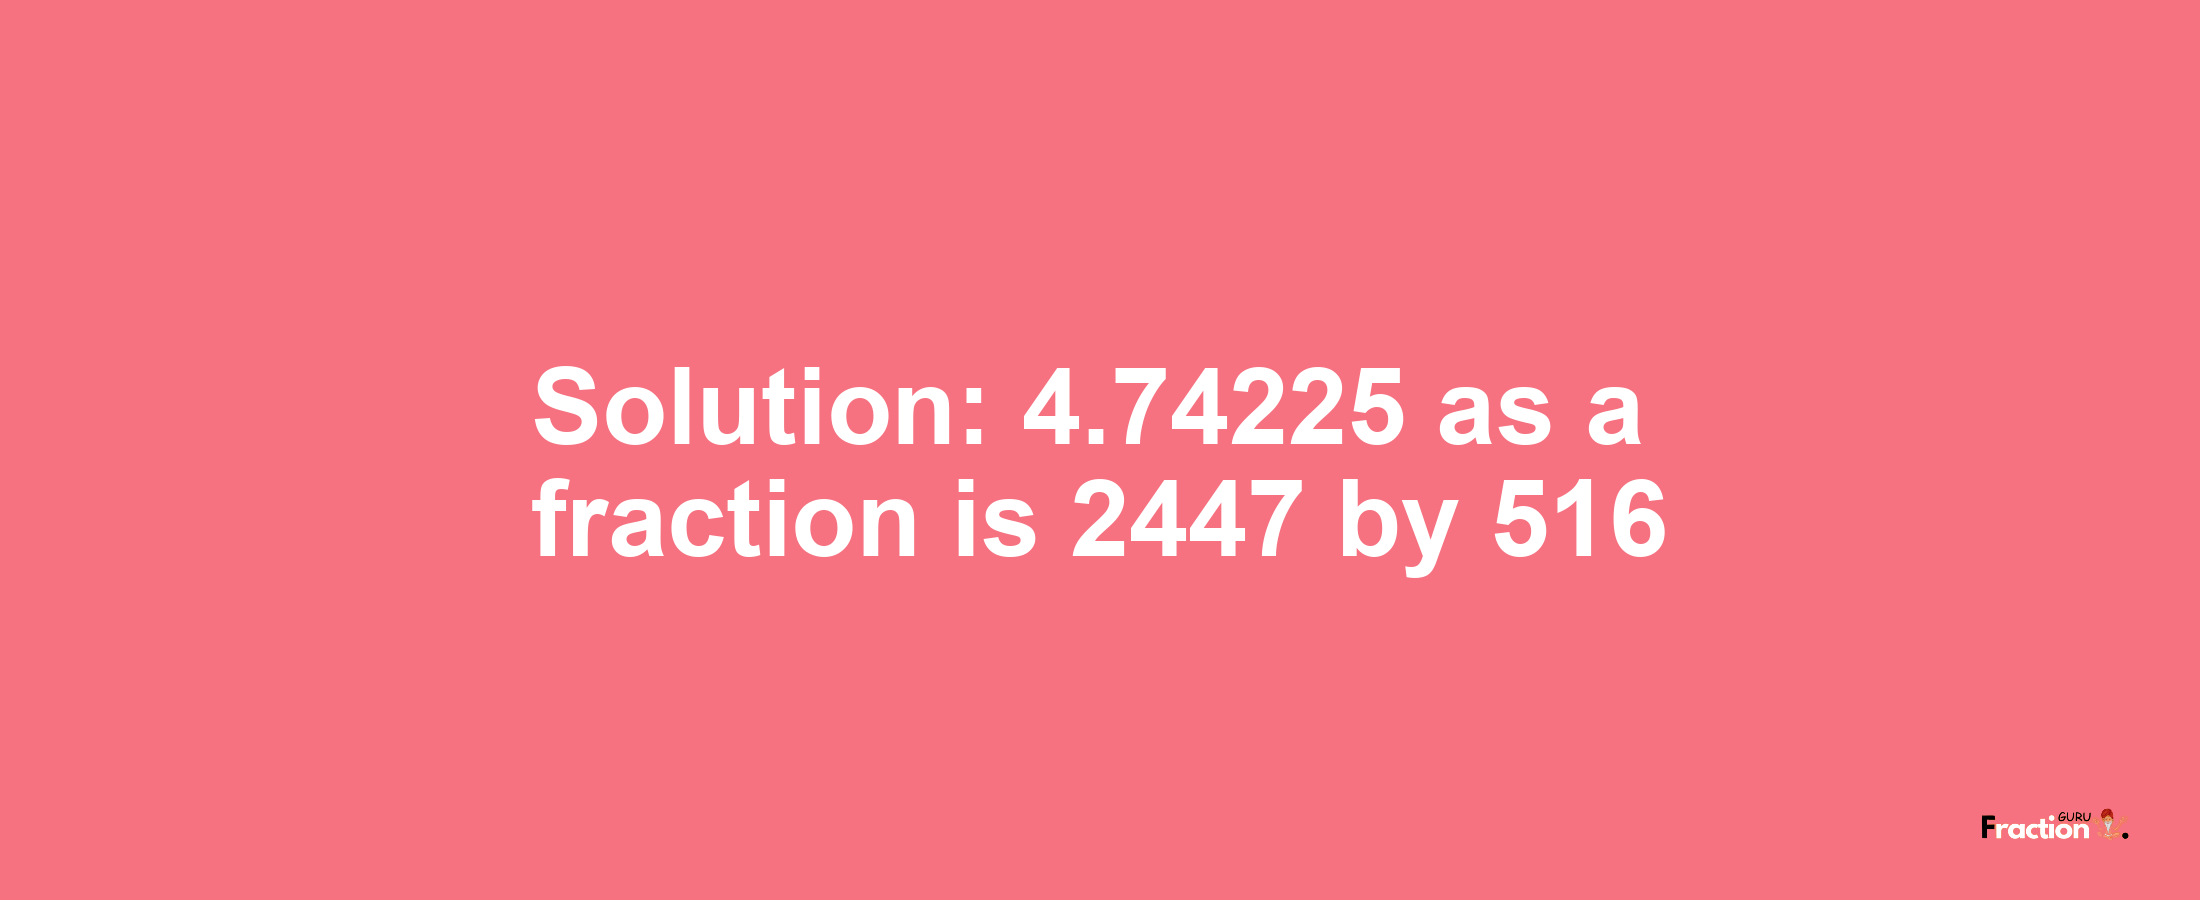 Solution:4.74225 as a fraction is 2447/516